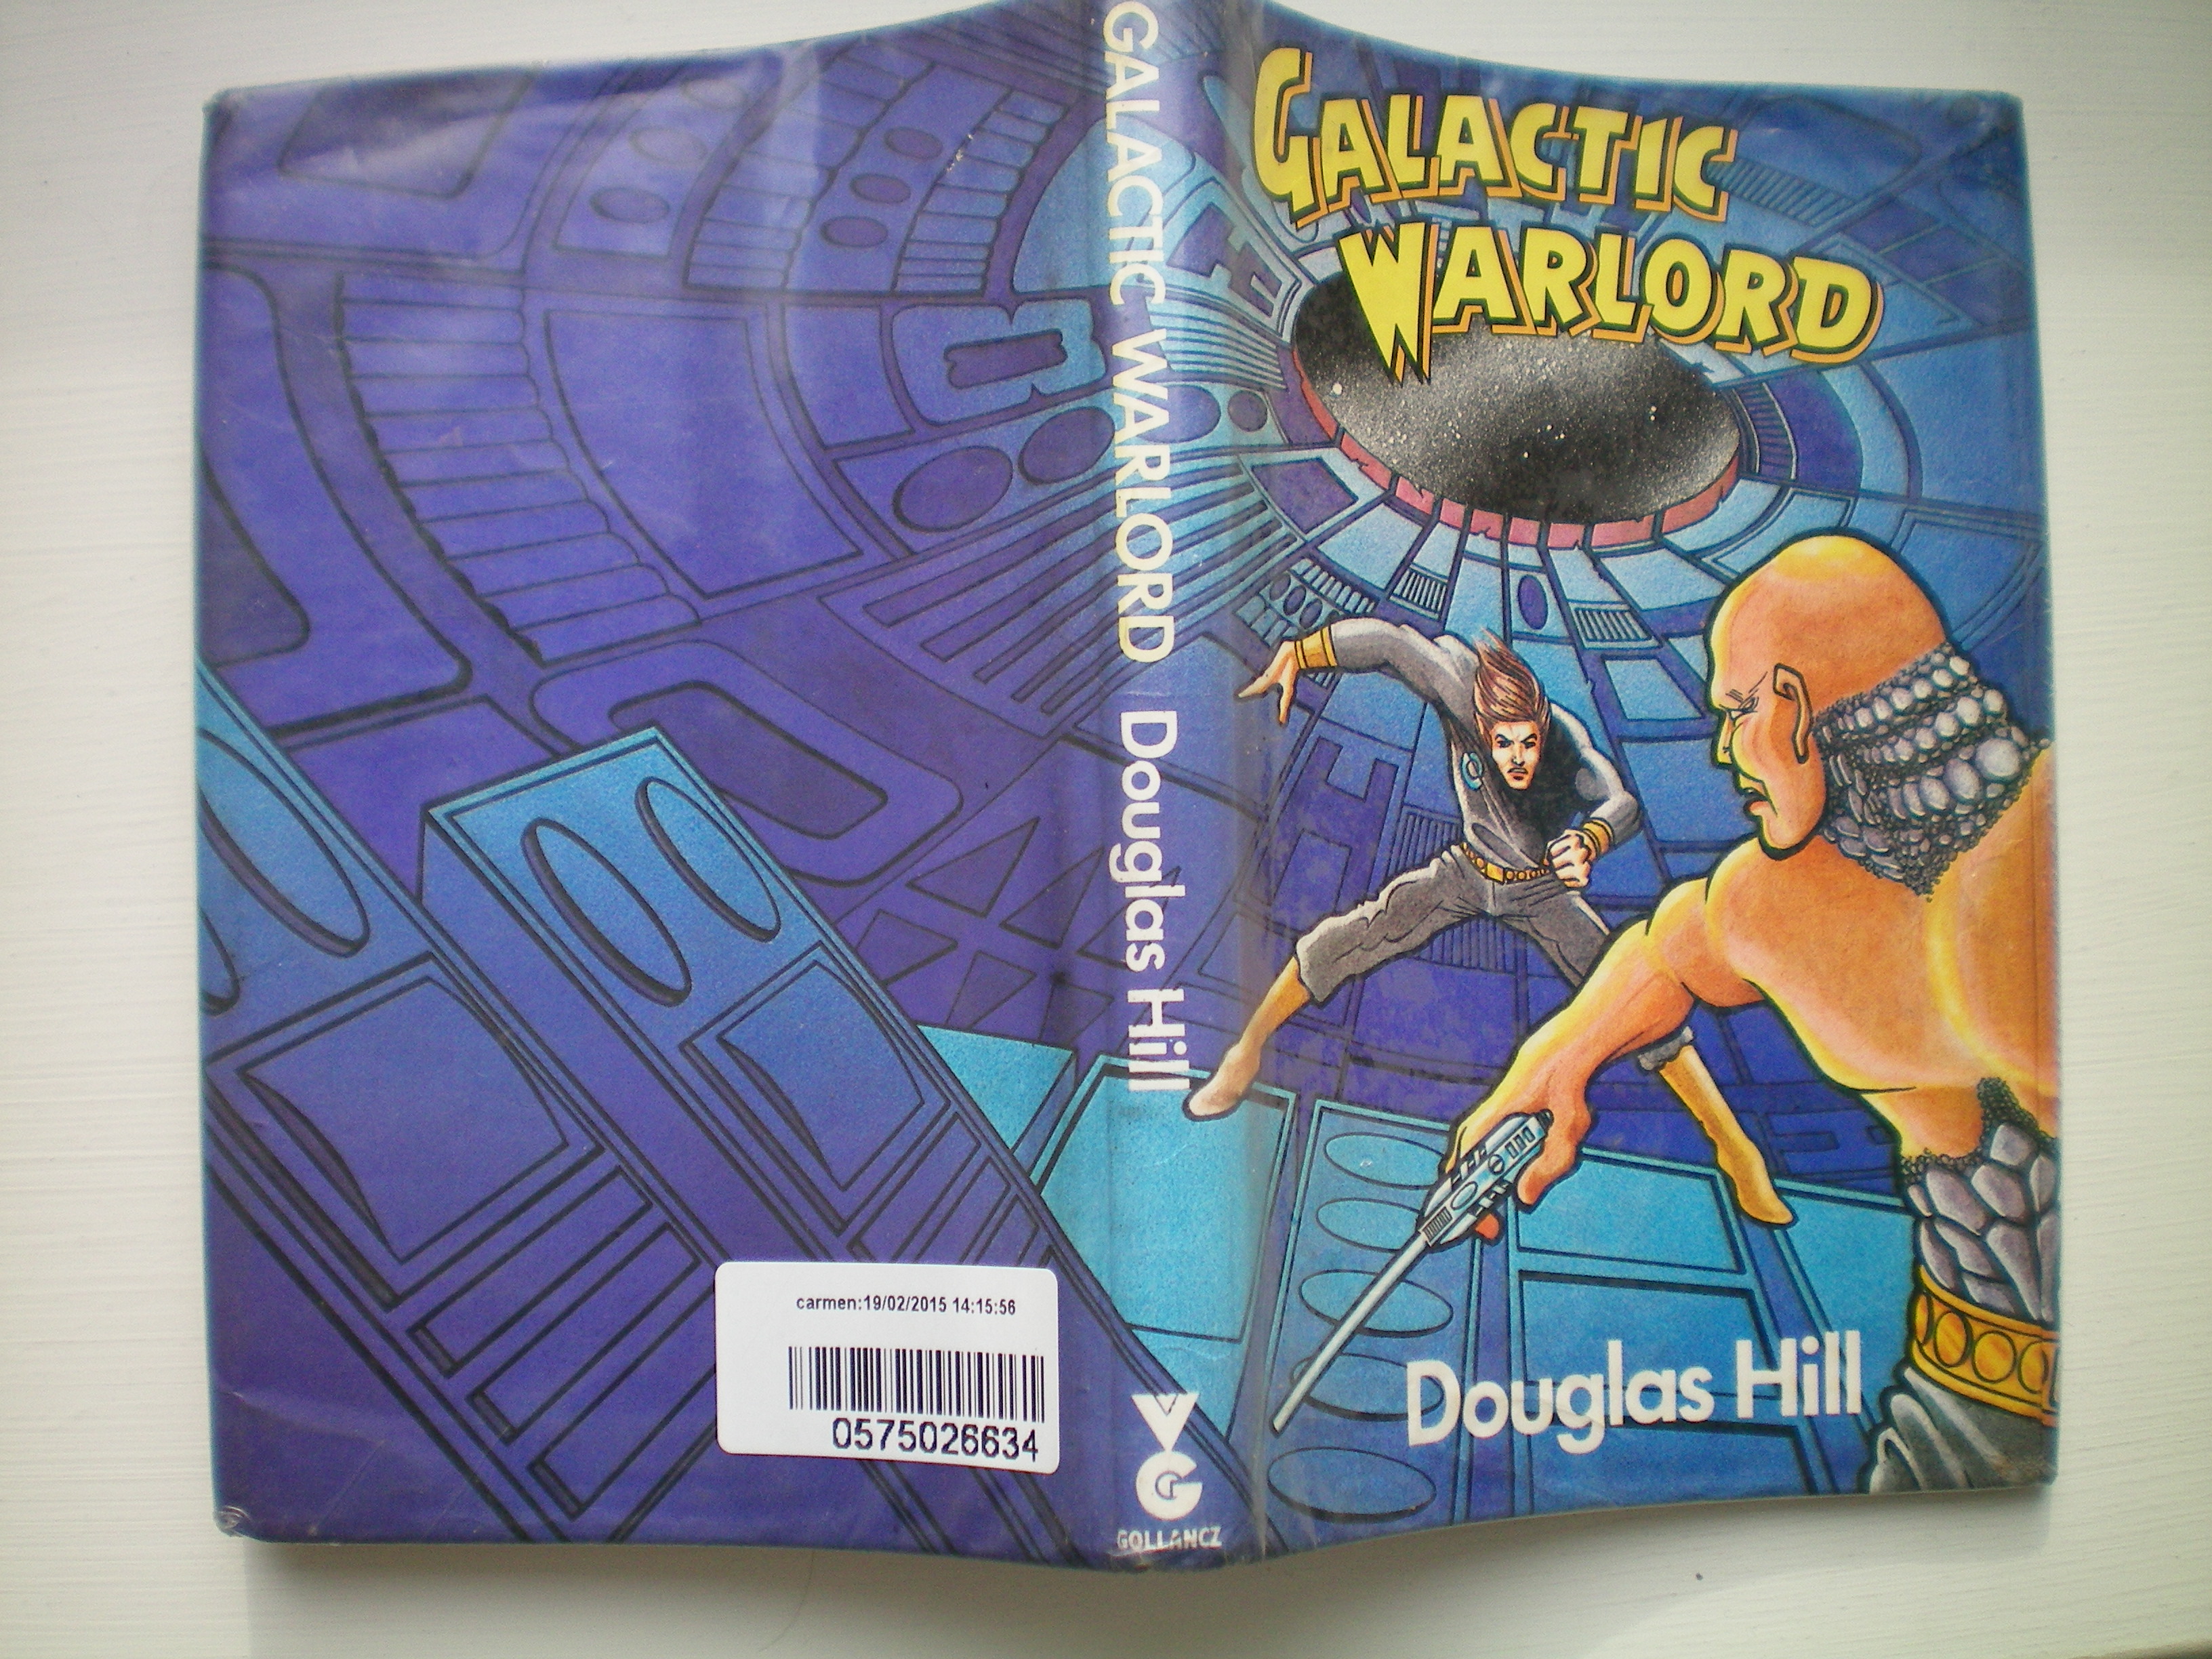 Galactic Warlord by Douglas Hill